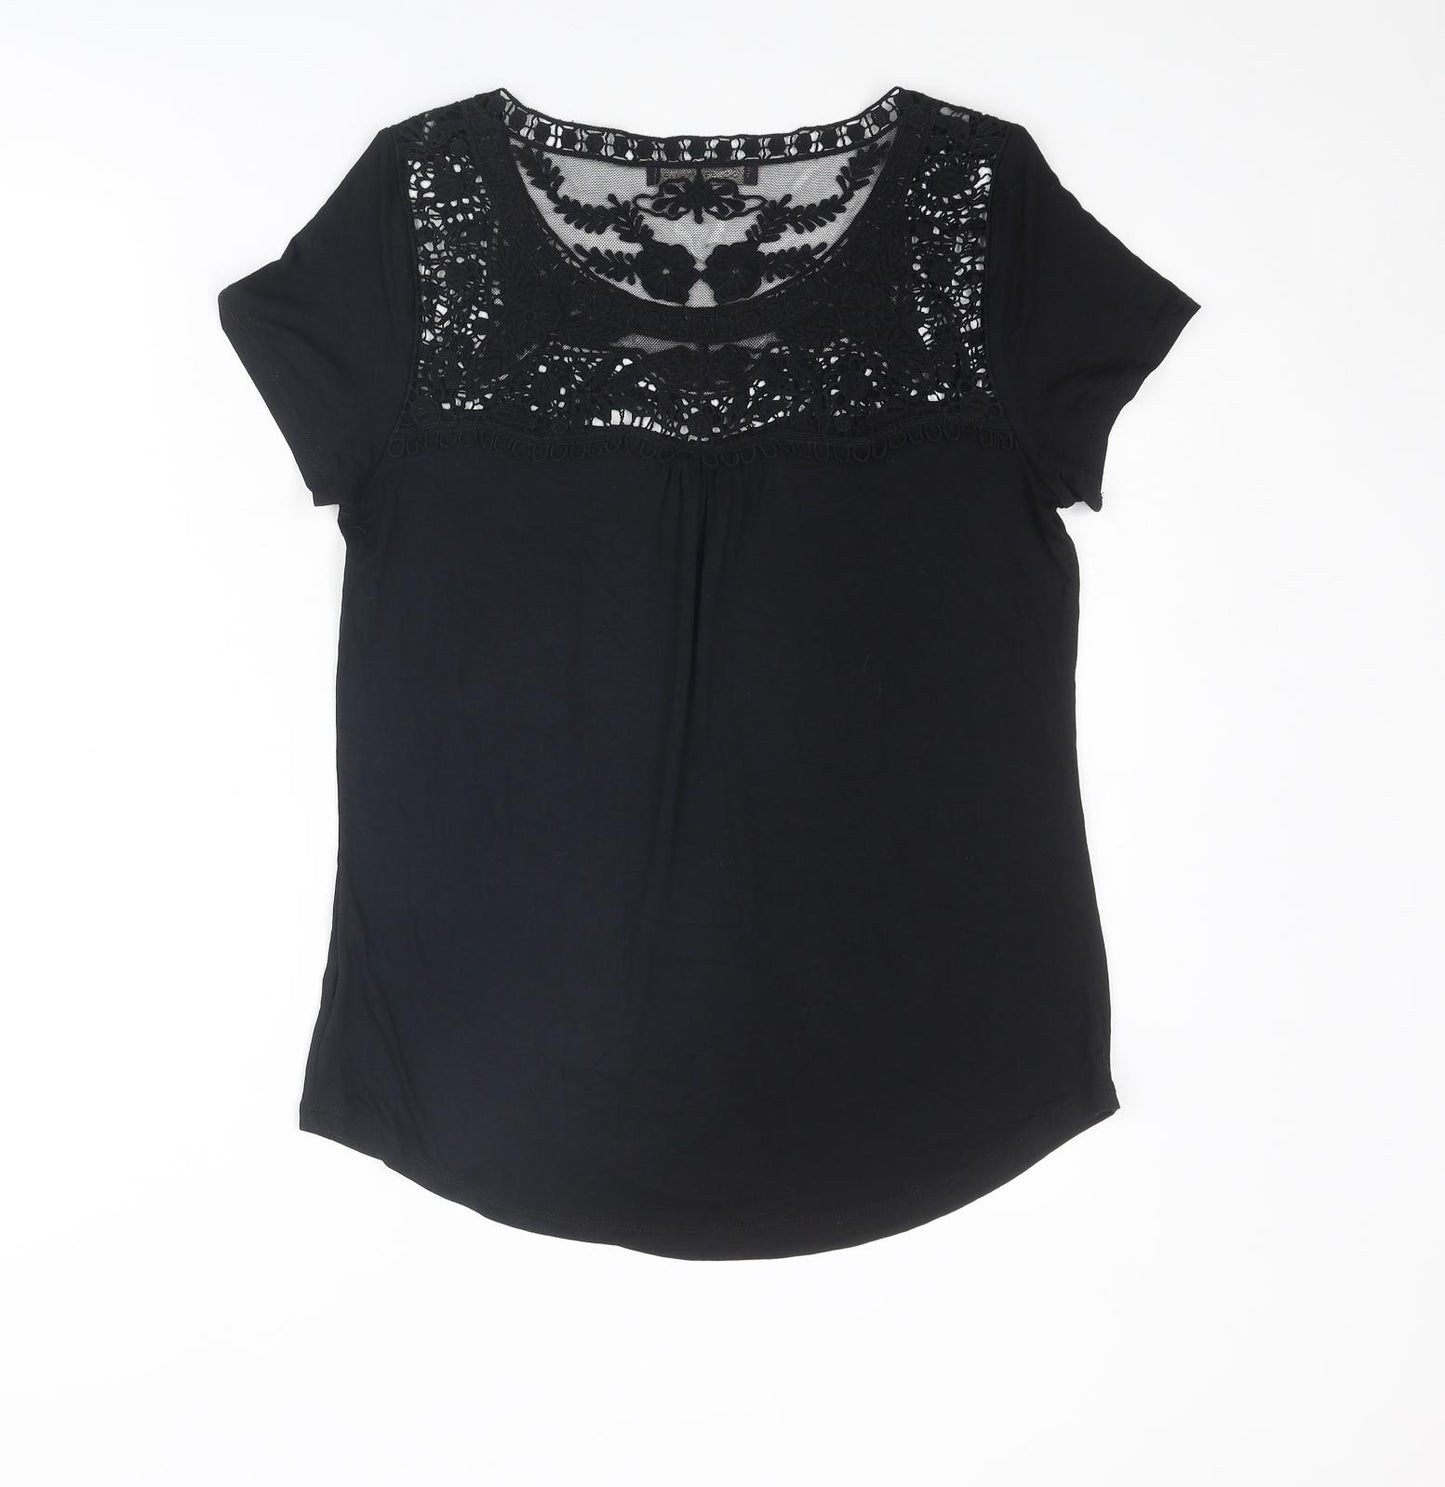 Marks and Spencer Womens Black Viscose Basic T-Shirt Size 10 Round Neck - Lace Details